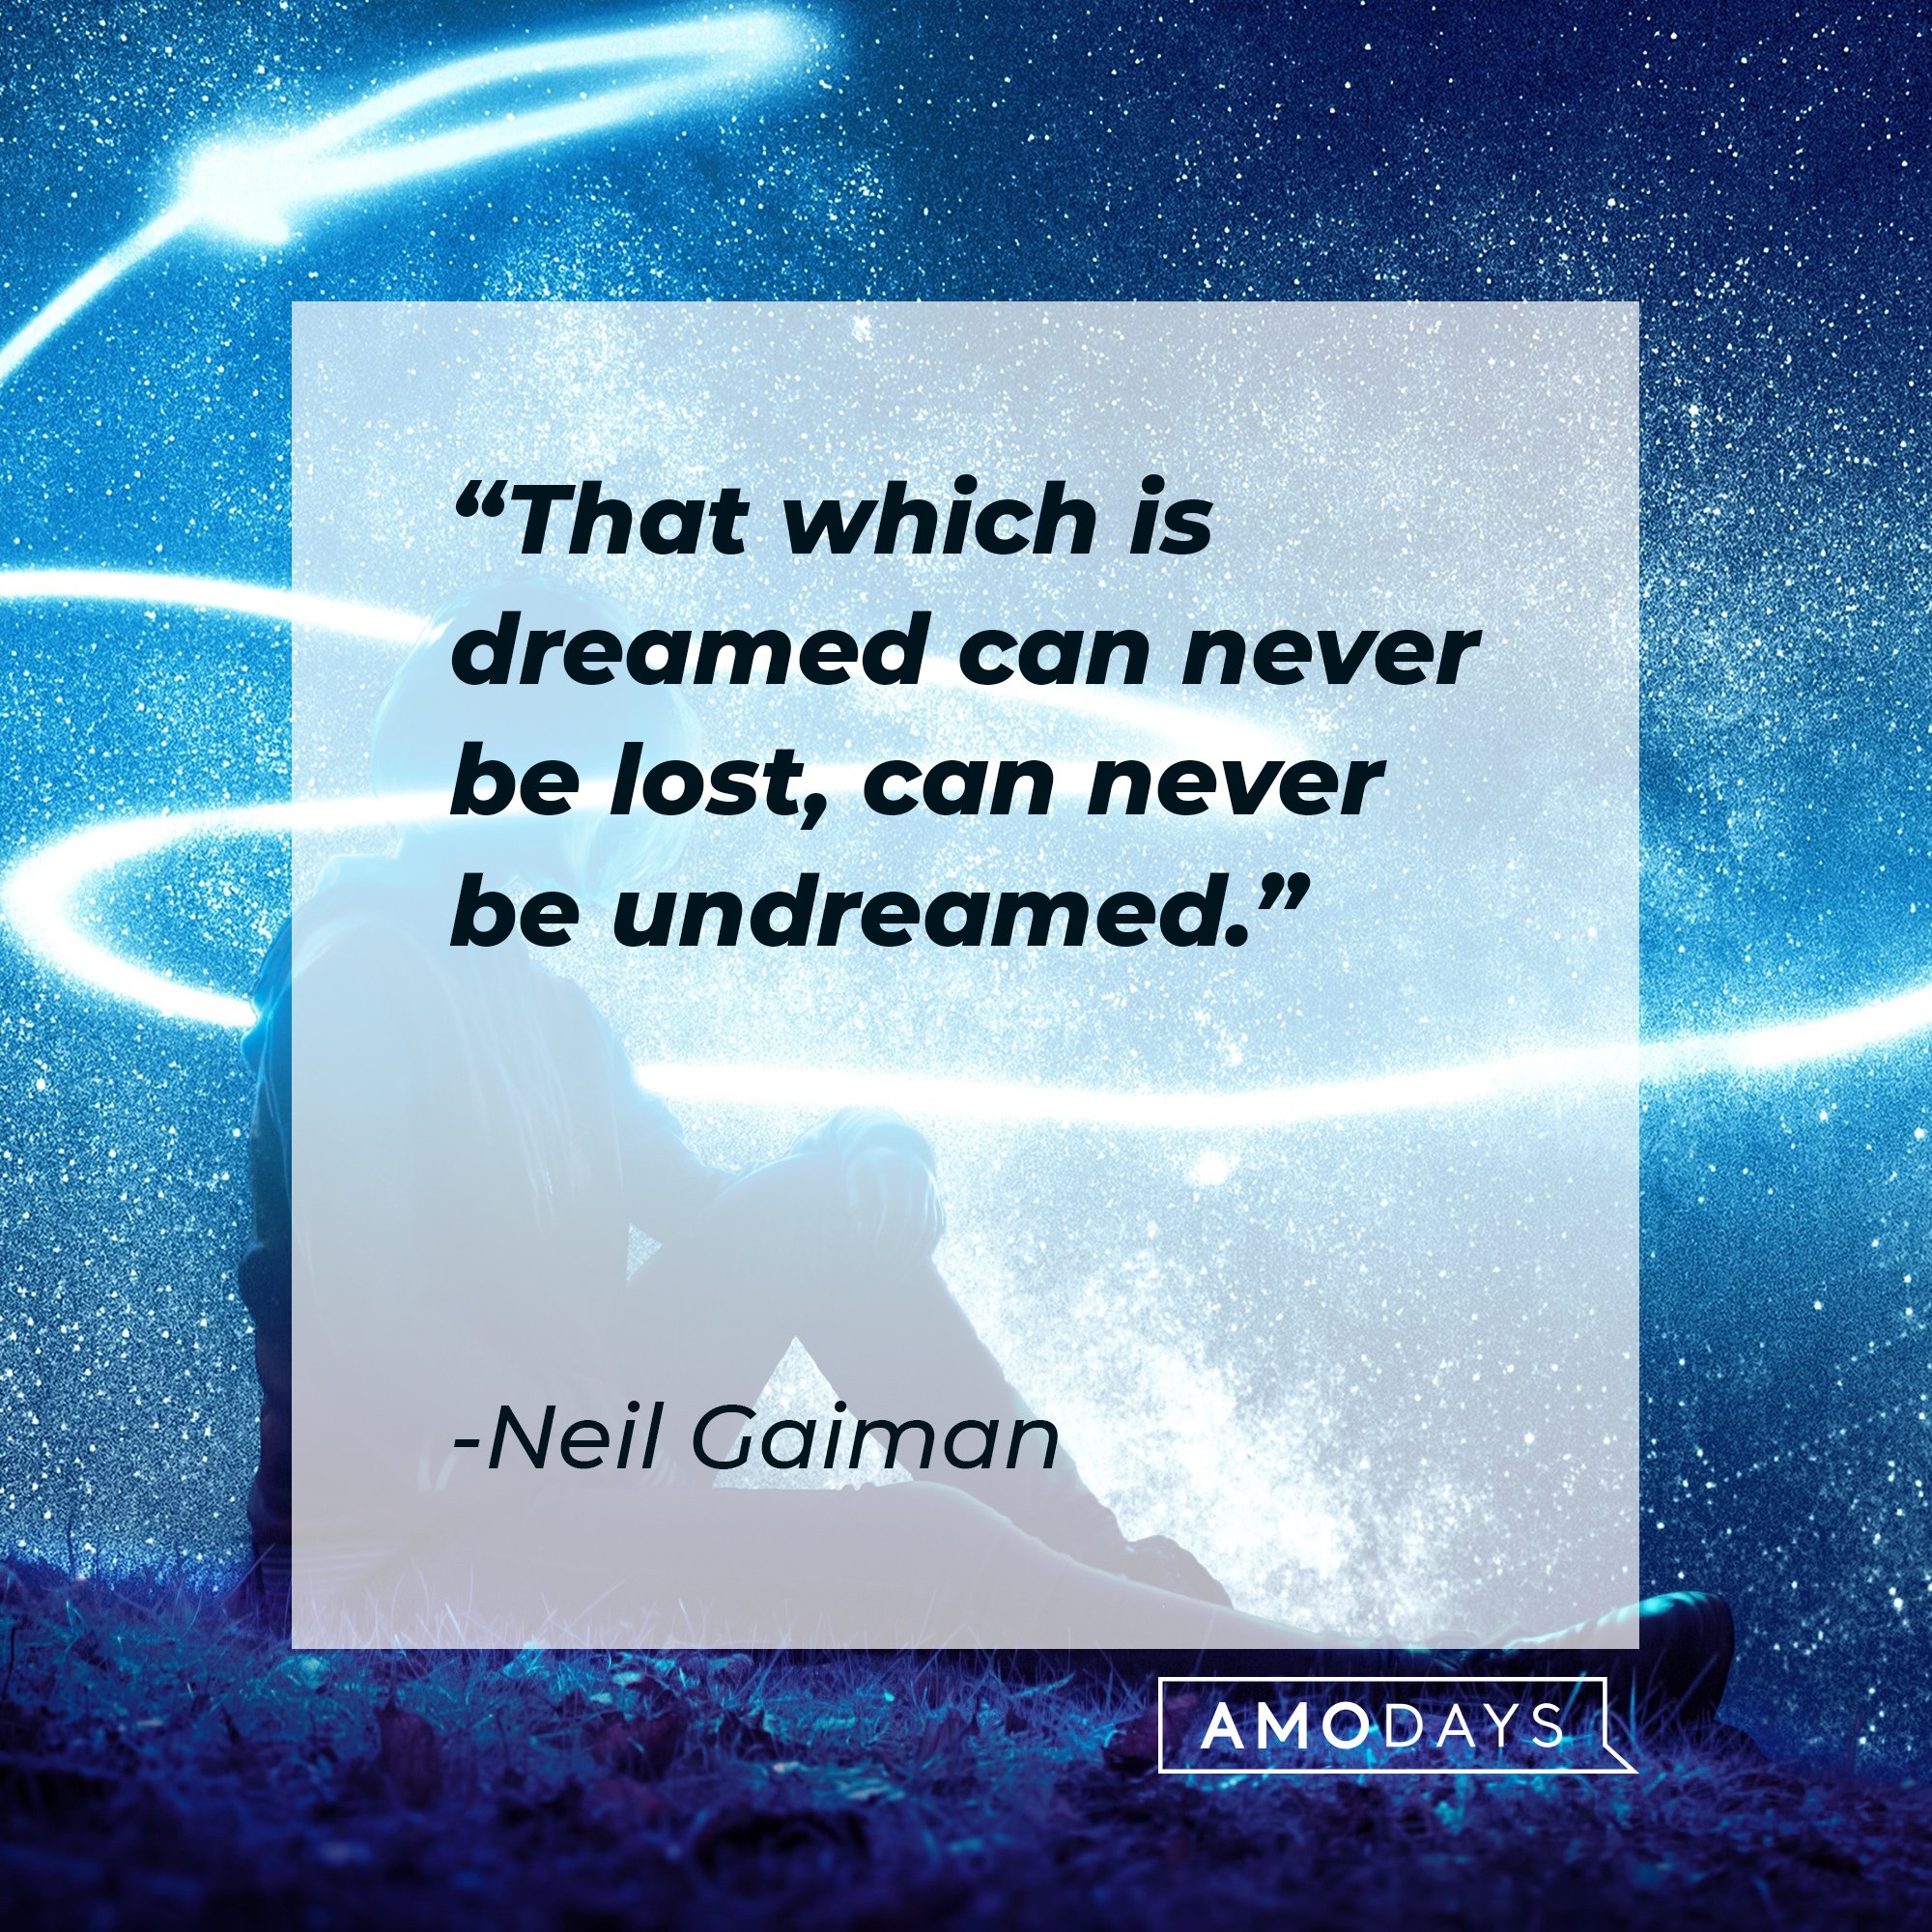 Neil Gaiman's quote: "That which is dreamed can never be lost, can never be undreamed." | Image: AmoDays